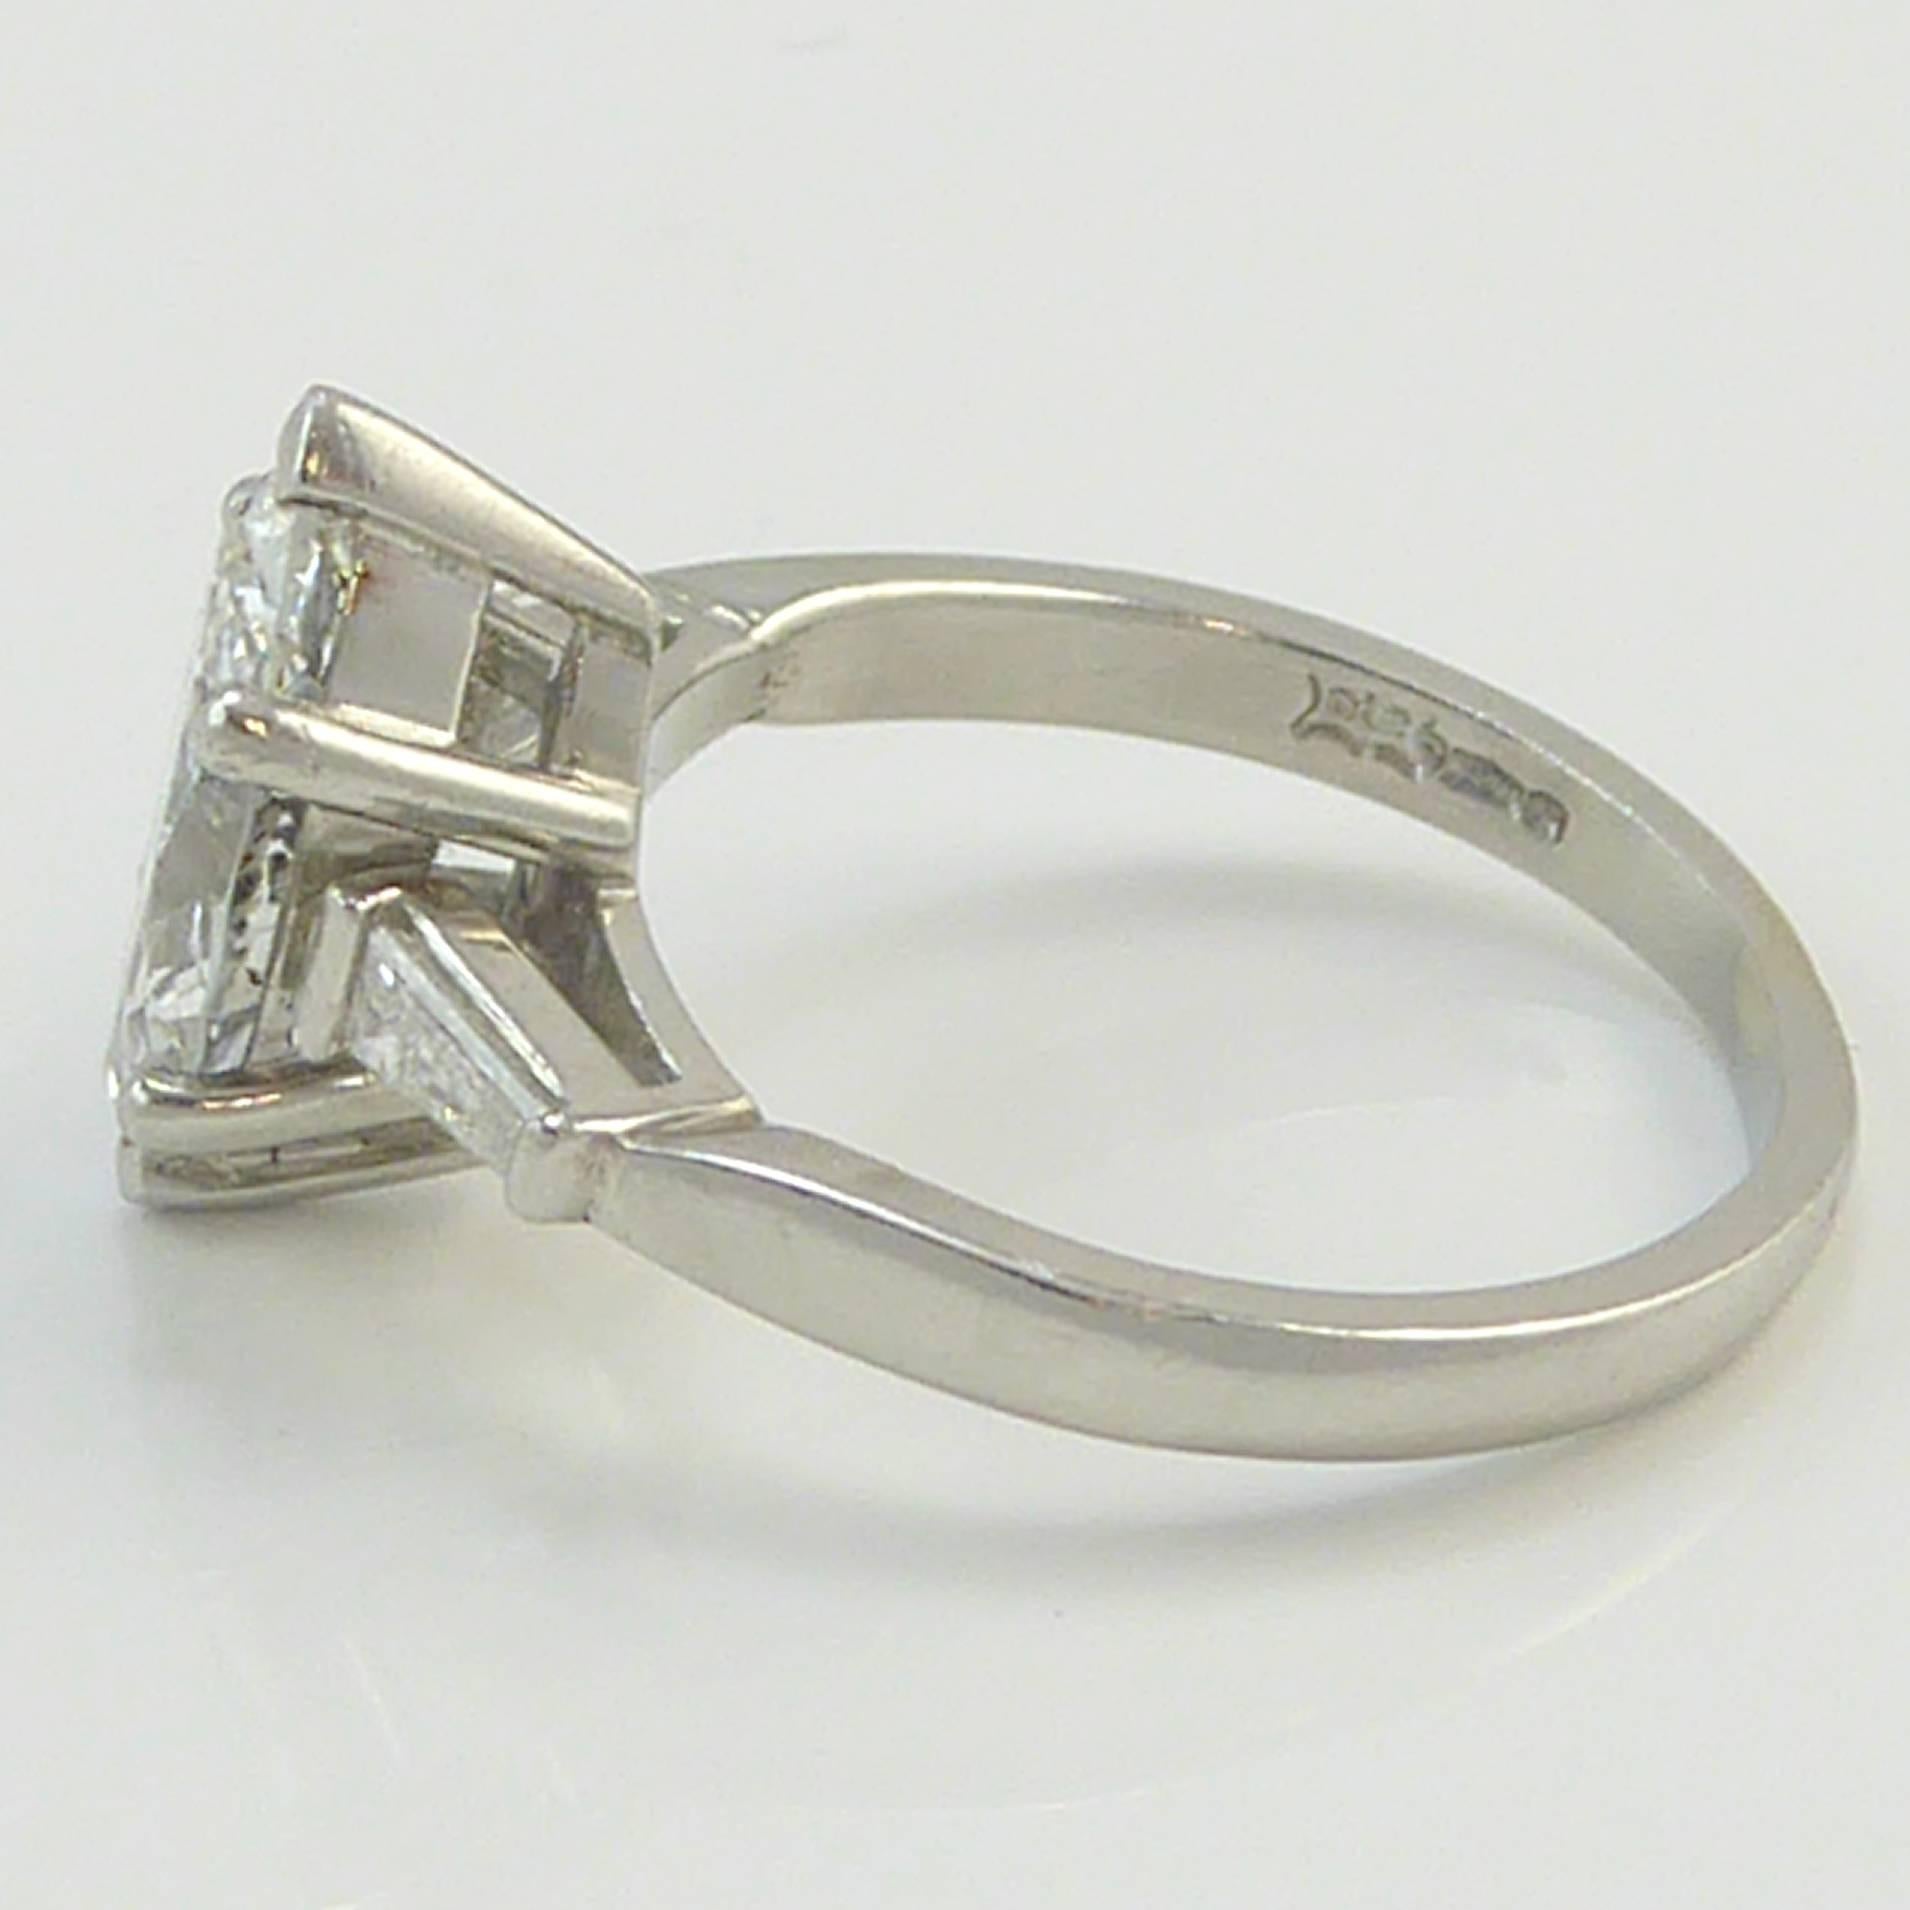 Contemporary 1.73 Carat Marquise Diamond Ring, Tapered Baguette Diamond Set Shoulders